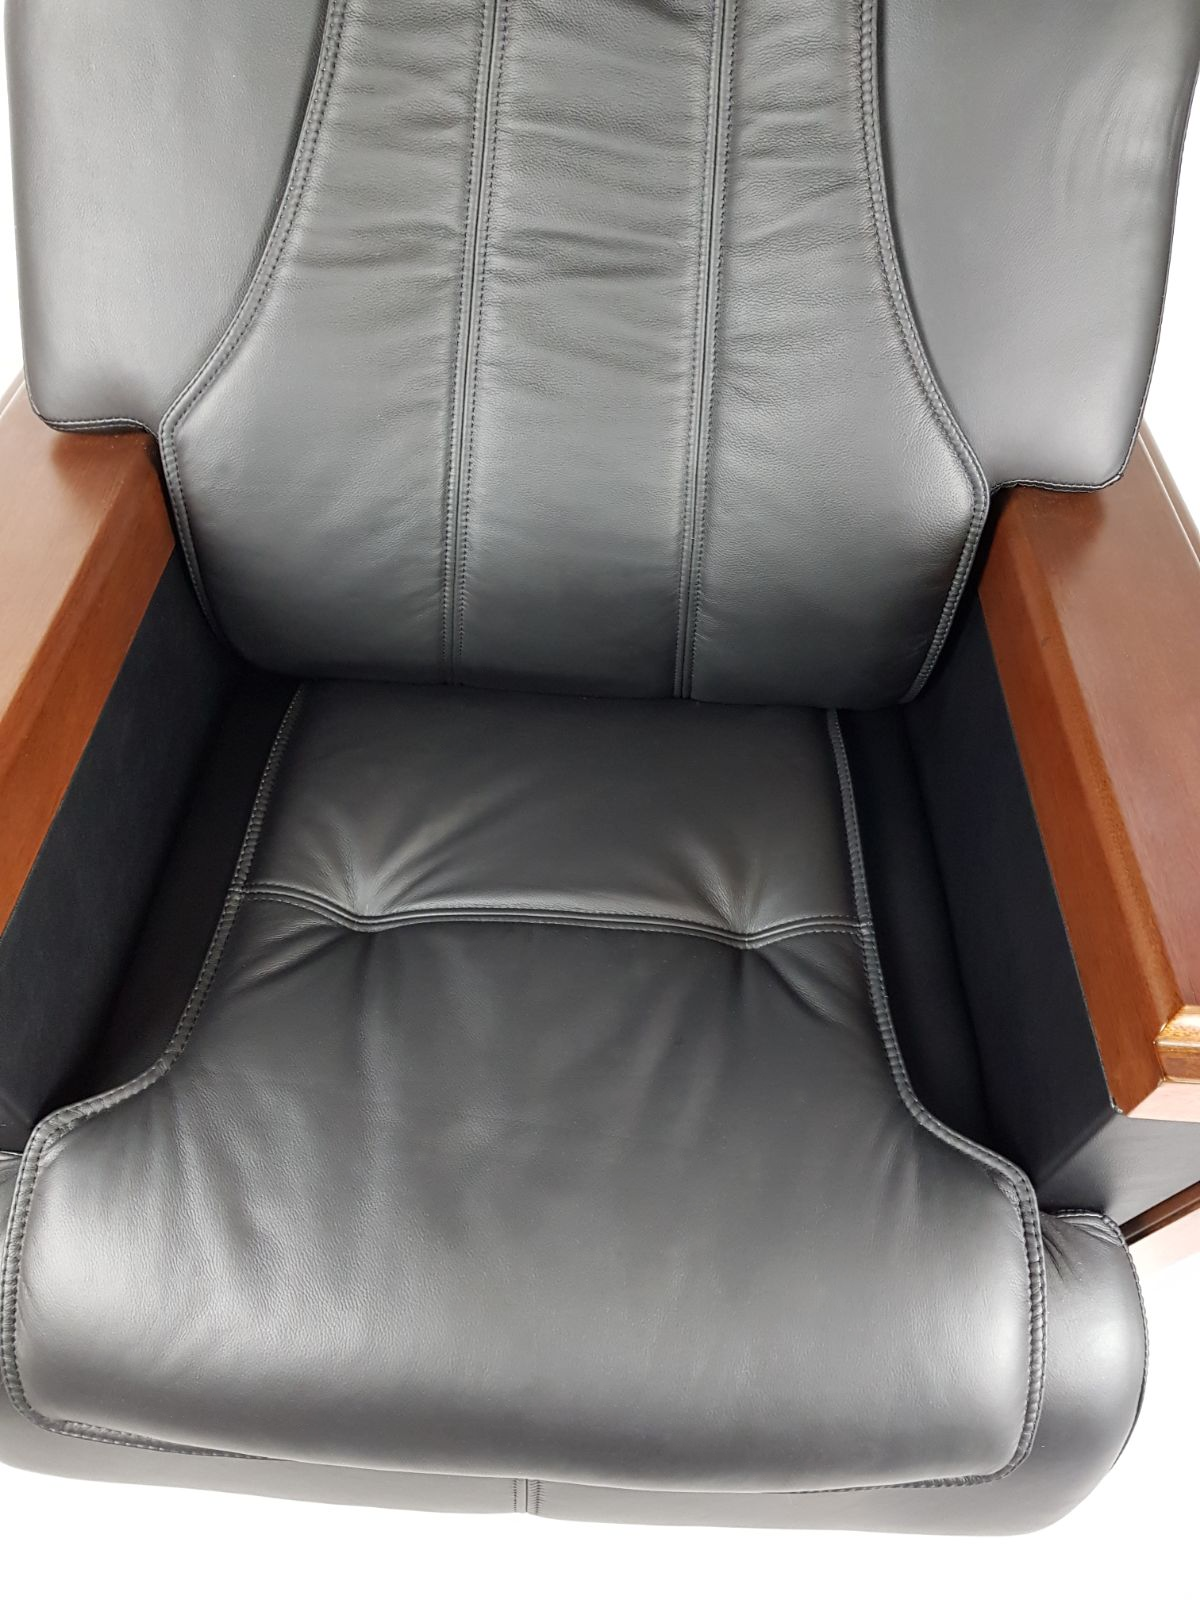 Extra Large Executive Genuine Black Leather Boss Chair with Wooden Arms - FK-2A